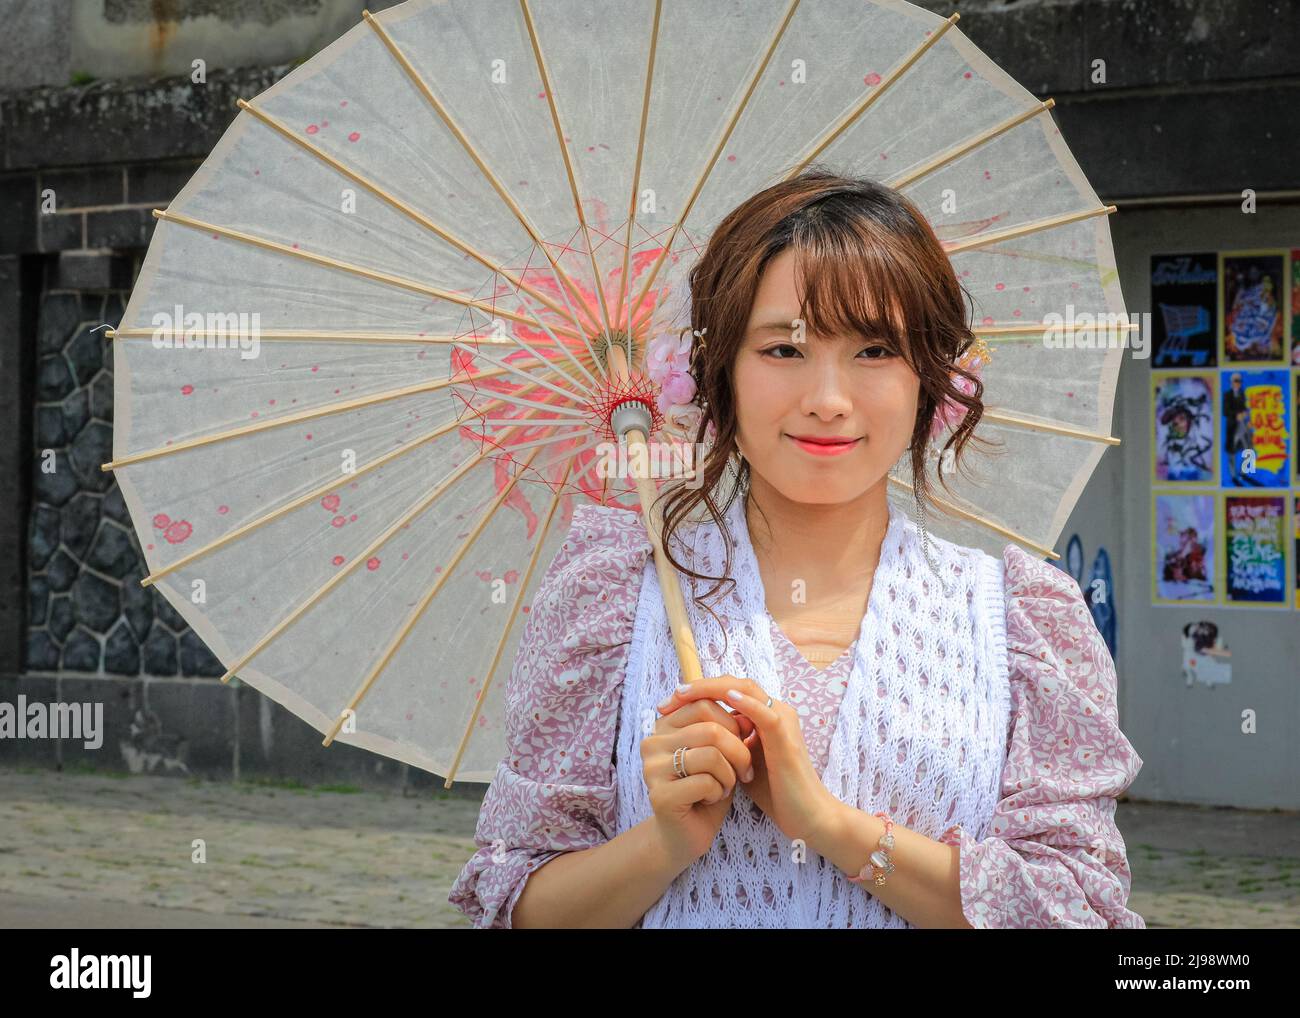 Düsseldorf, NRW, Germany. 21st May, 2022. A young Japanese woman has come in traditional outfit to enjoy the day. Tens of thousands of visitors and cosplayers enjoy the warm sunshine along the river Rhine embankment in their outfits inspired by Japanese anime, video and games. Stage performances, cosplay, stalls and demonstrations of Japanese culture, sports and traditions are featured at Düsseldorf's annual Japan Day, celebrating Japan and the Japanese community in the city. Düsseldorf is home to the largest Japanese community in Germany. Credit: Imageplotter/Alamy Live News Stock Photo